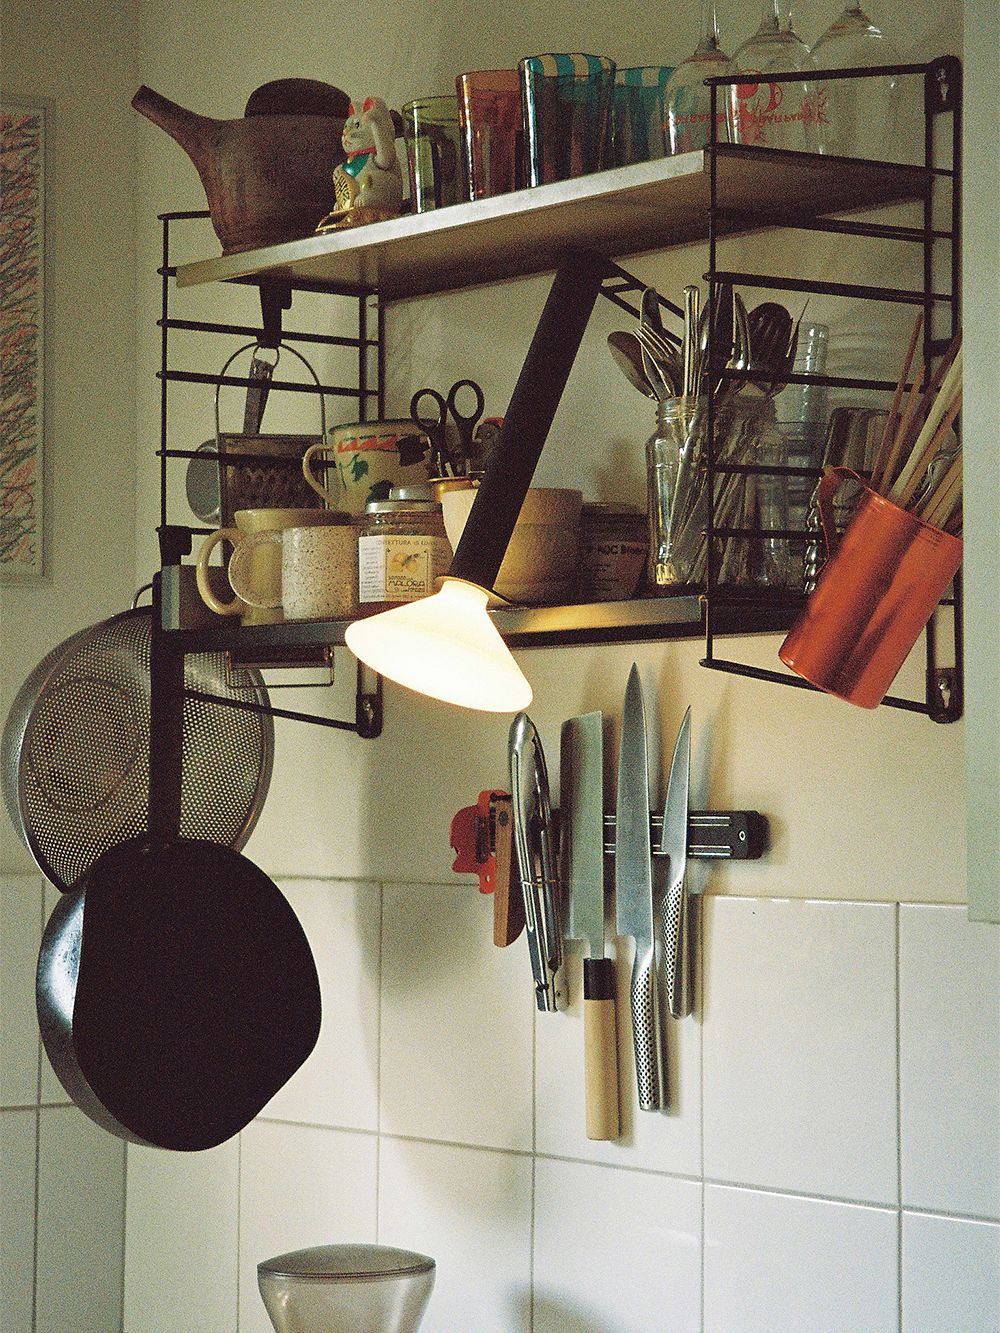 An image of Muuto's Piton lamp as part of the kitchen decor.